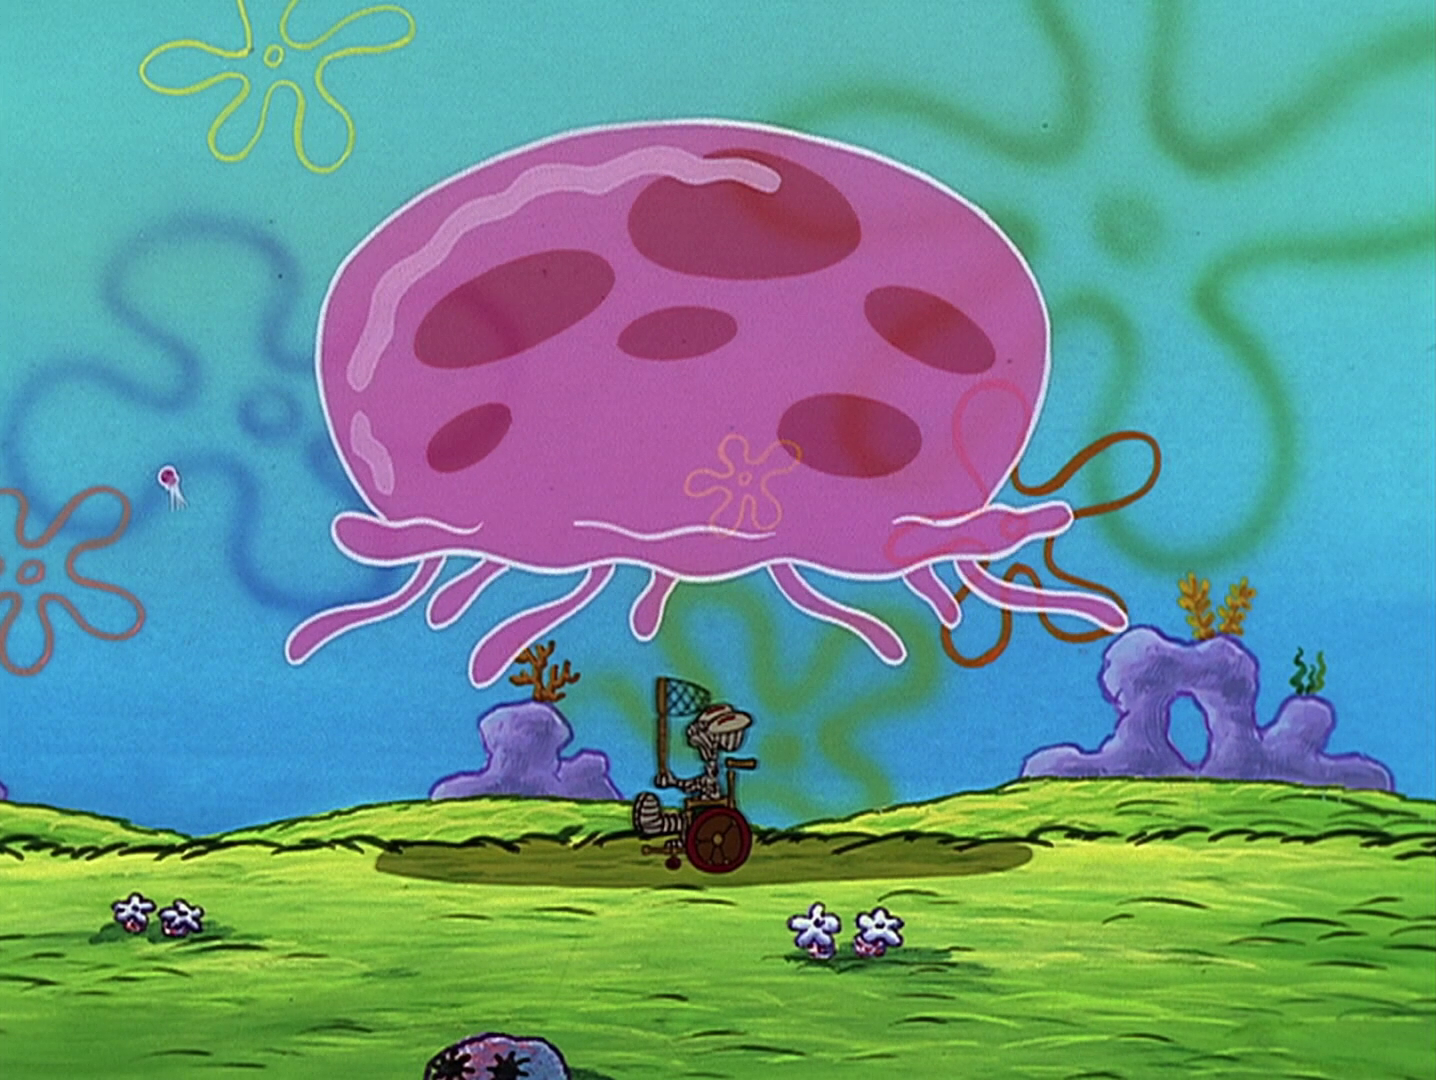 https://static.wikia.nocookie.net/spongebob/images/f/f2/Jellyfishing_170.png/revision/latest?cb=20191210032816